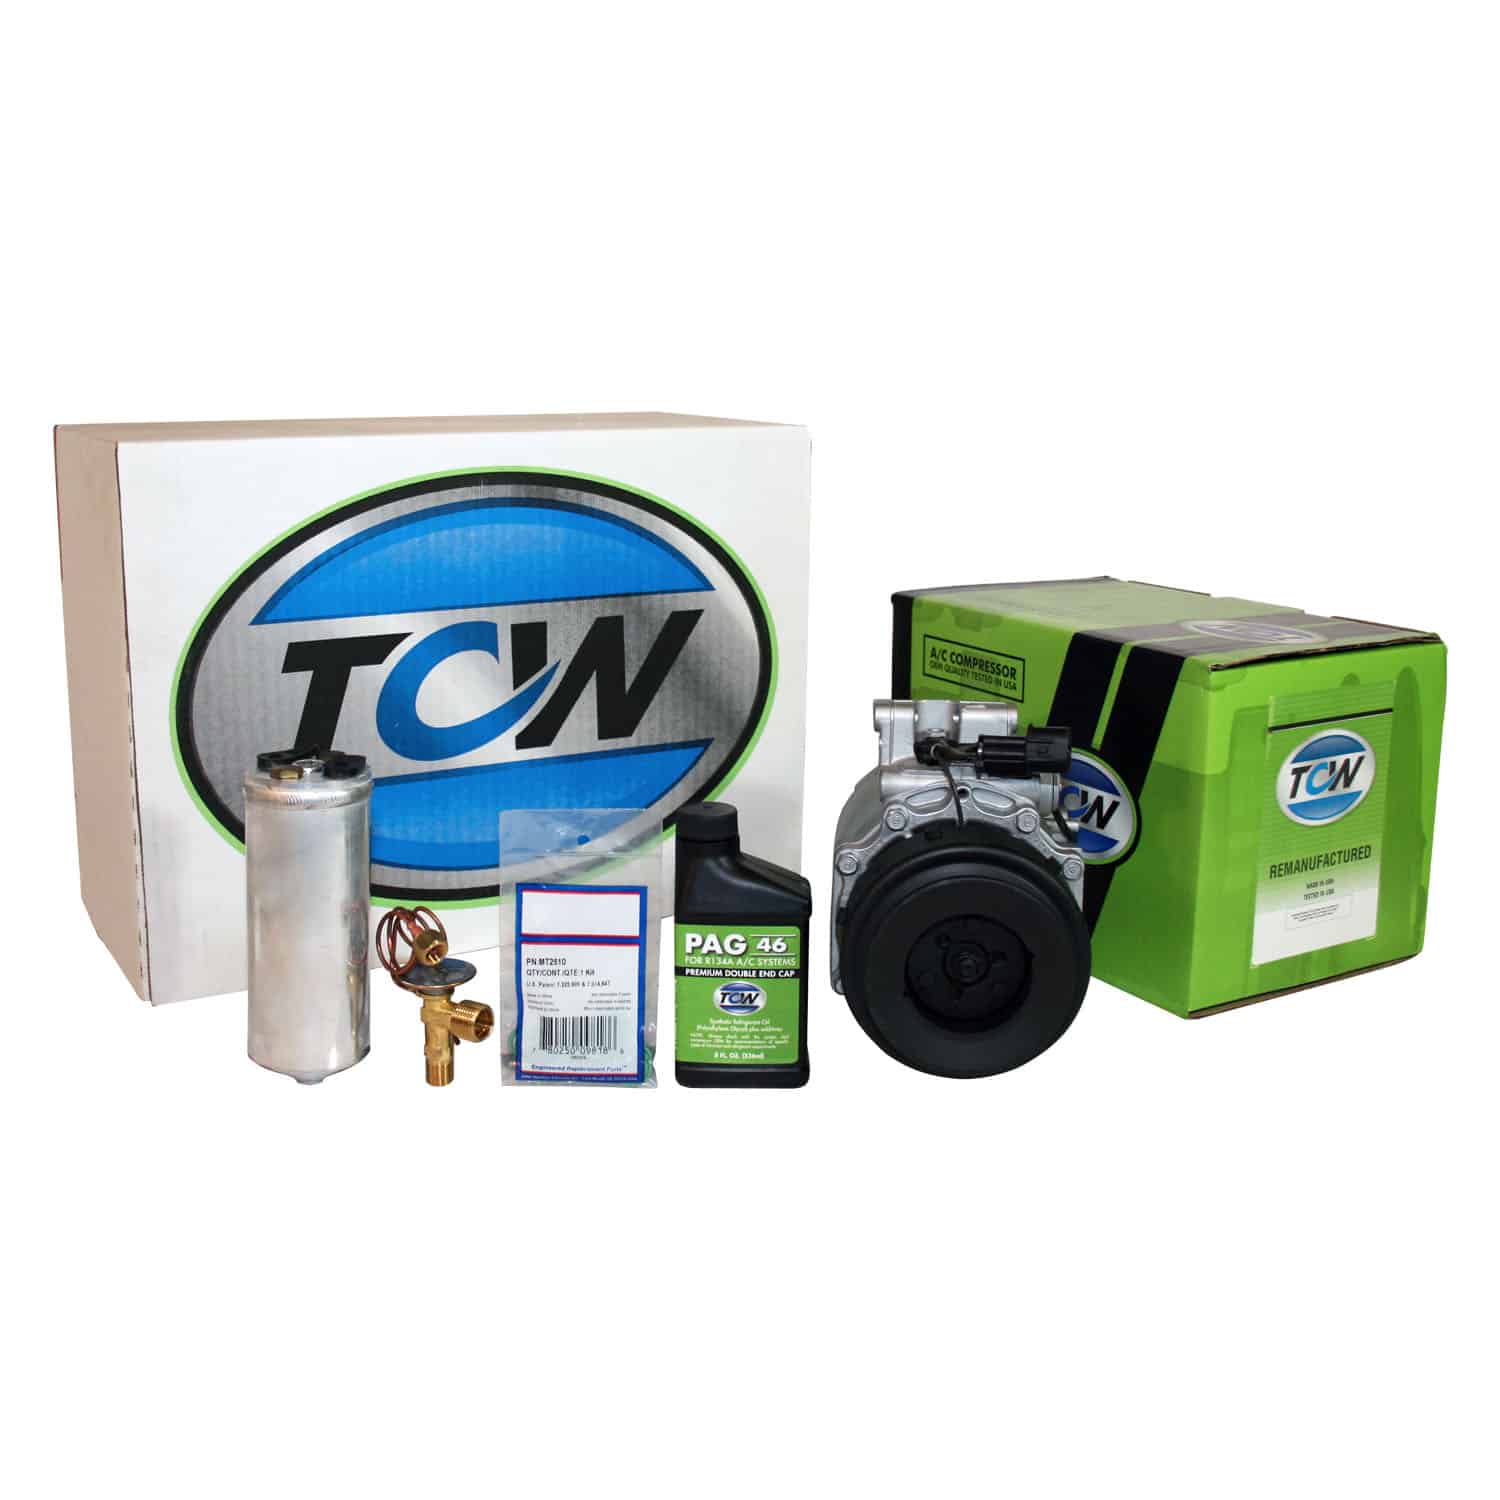 TCW Vehicle A/C Kit K1000268R Remanufactured Product Image field_60b6a13a6e67c